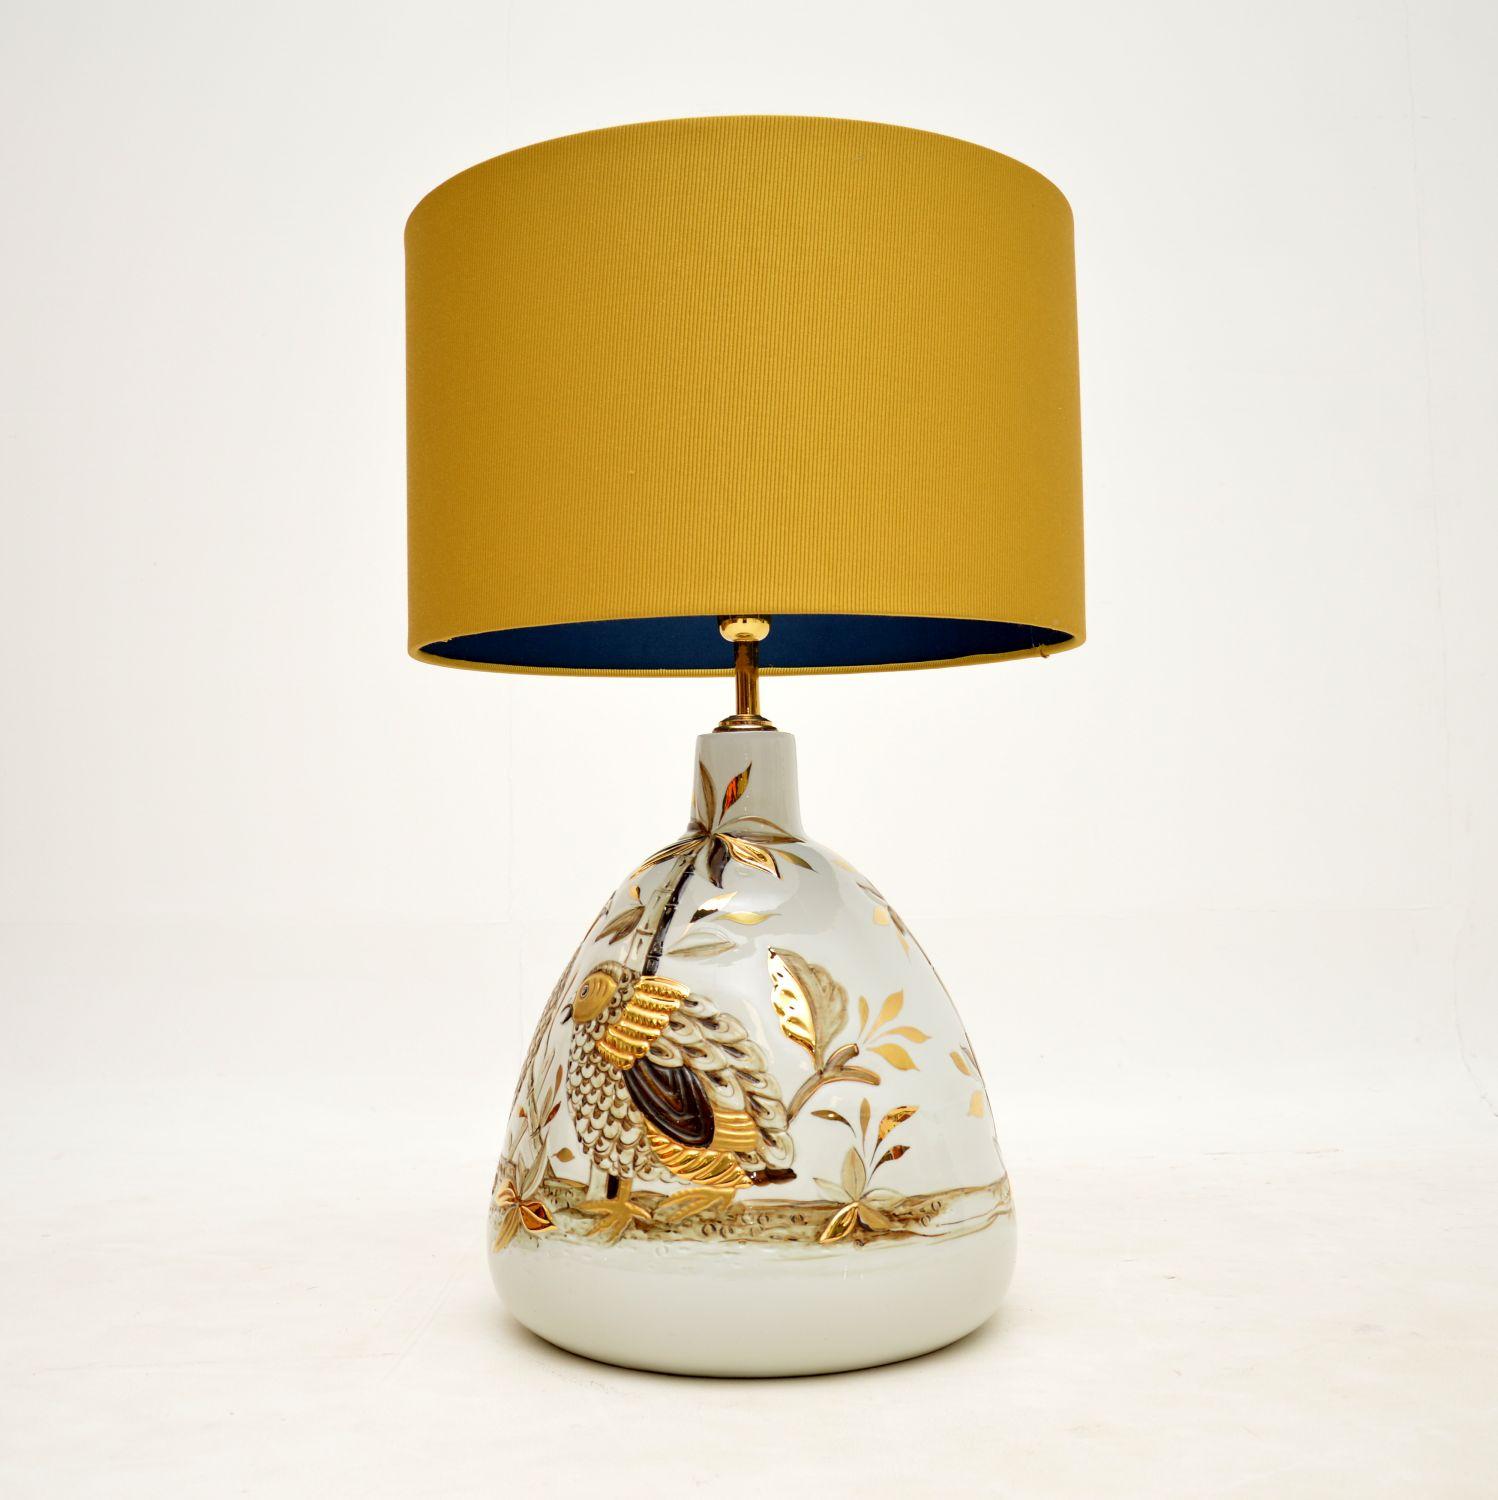 An absolutely gorgeous vintage Italian Capodimonte ceramic table lamp. this was made in Italy, it dates from the 1970-80’s.

It is a large and impressive size, it is beautifully hand painted and artist signed. The gold, cream and brown tones are